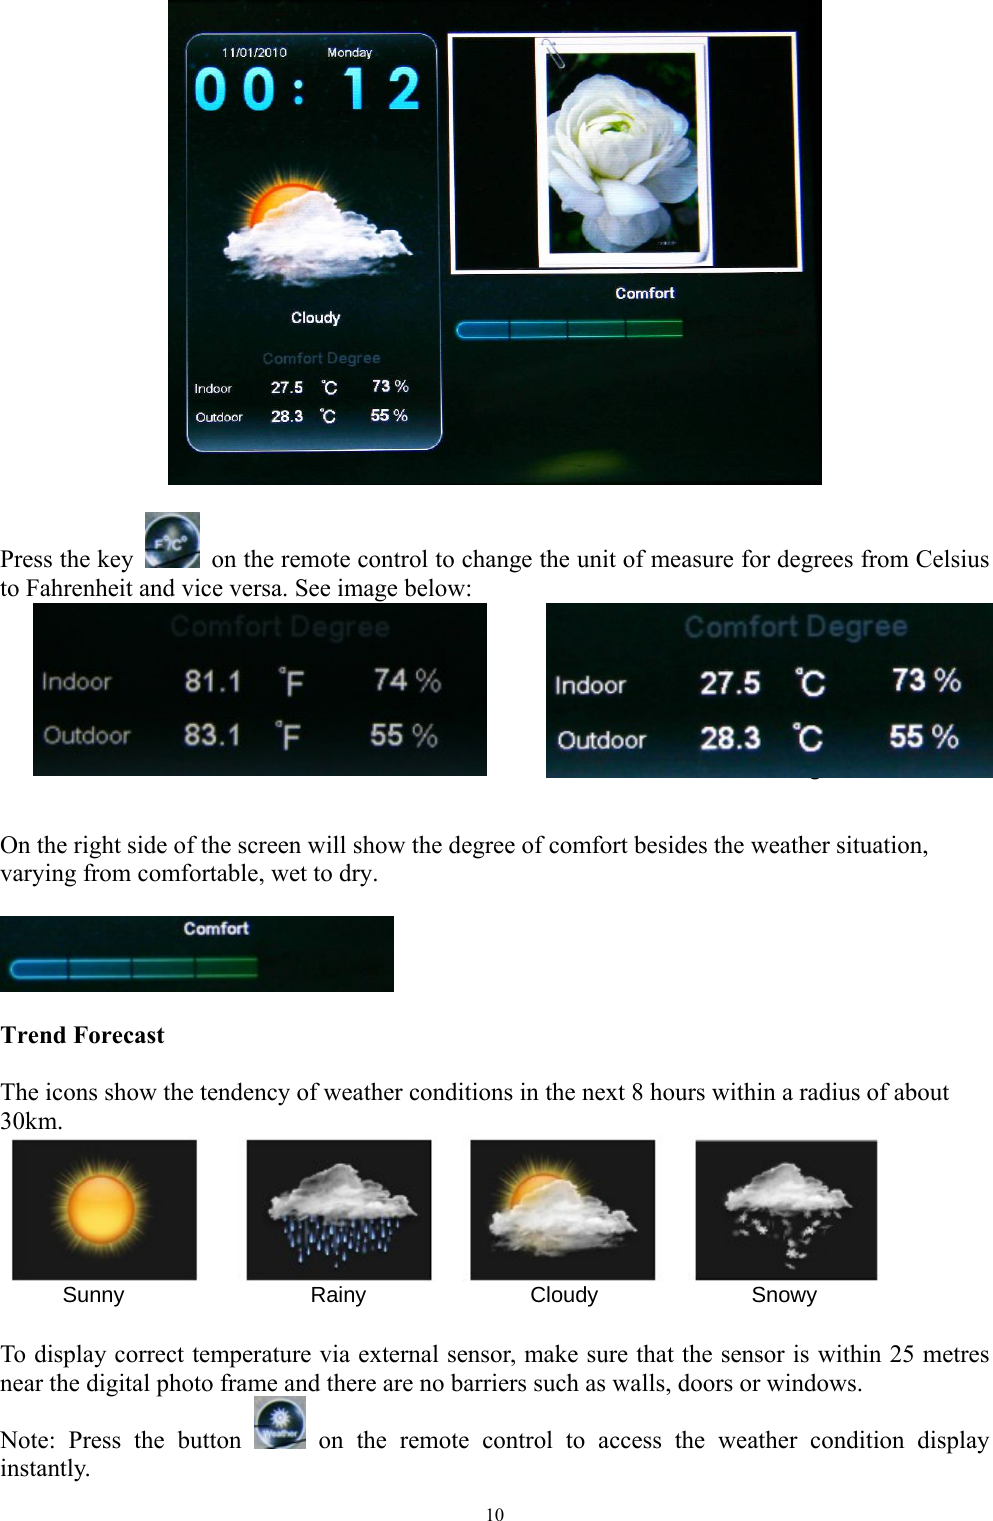   10    Press the key   on the remote control to change the unit of measure for degrees from Celsius to Fahrenheit and vice versa. See image below:      Gradi Fahrenheit                                  Gradi Centigradi   On the right side of the screen will show the degree of comfort besides the weather situation, varying from comfortable, wet to dry.    Trend Forecast    The icons show the tendency of weather conditions in the next 8 hours within a radius of about 30km.       Sunny                 Rainy               Cloudy              Snowy  To display correct temperature via external sensor, make sure that the sensor is within 25 metres near the digital photo frame and there are no barriers such as walls, doors or windows. Note: Press the button   on the remote control to access the weather condition display instantly.  